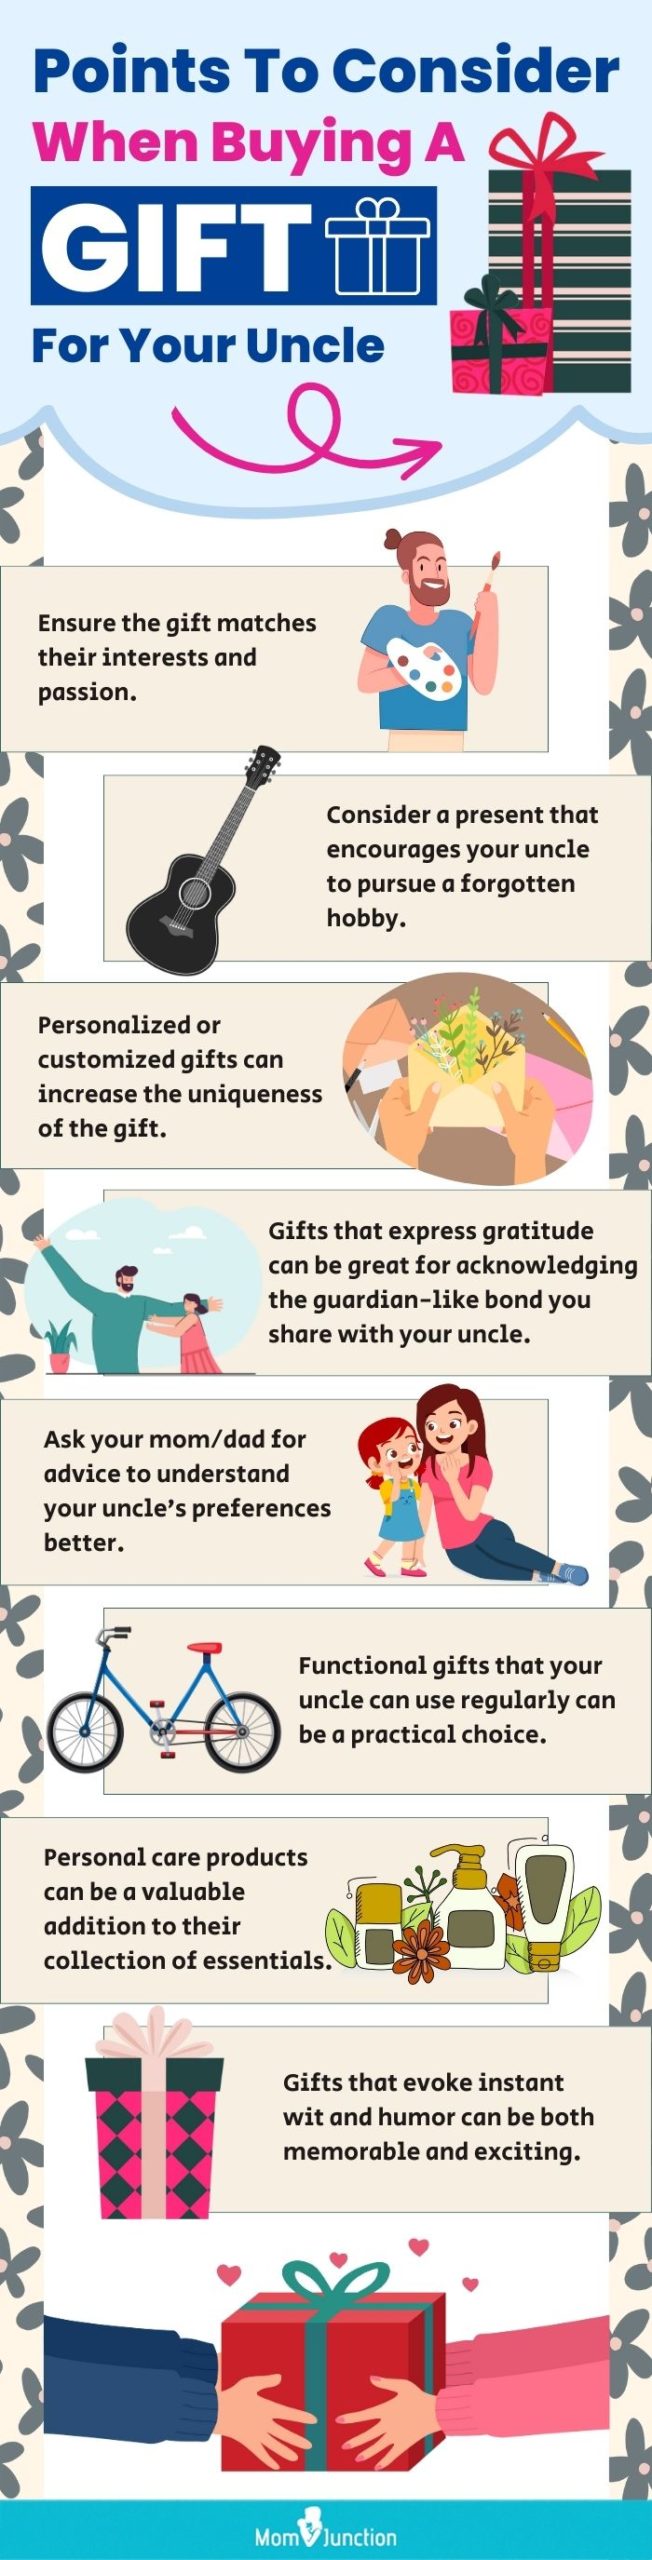 Points To Consider When Buying A Gift For Your Uncle (infographic)